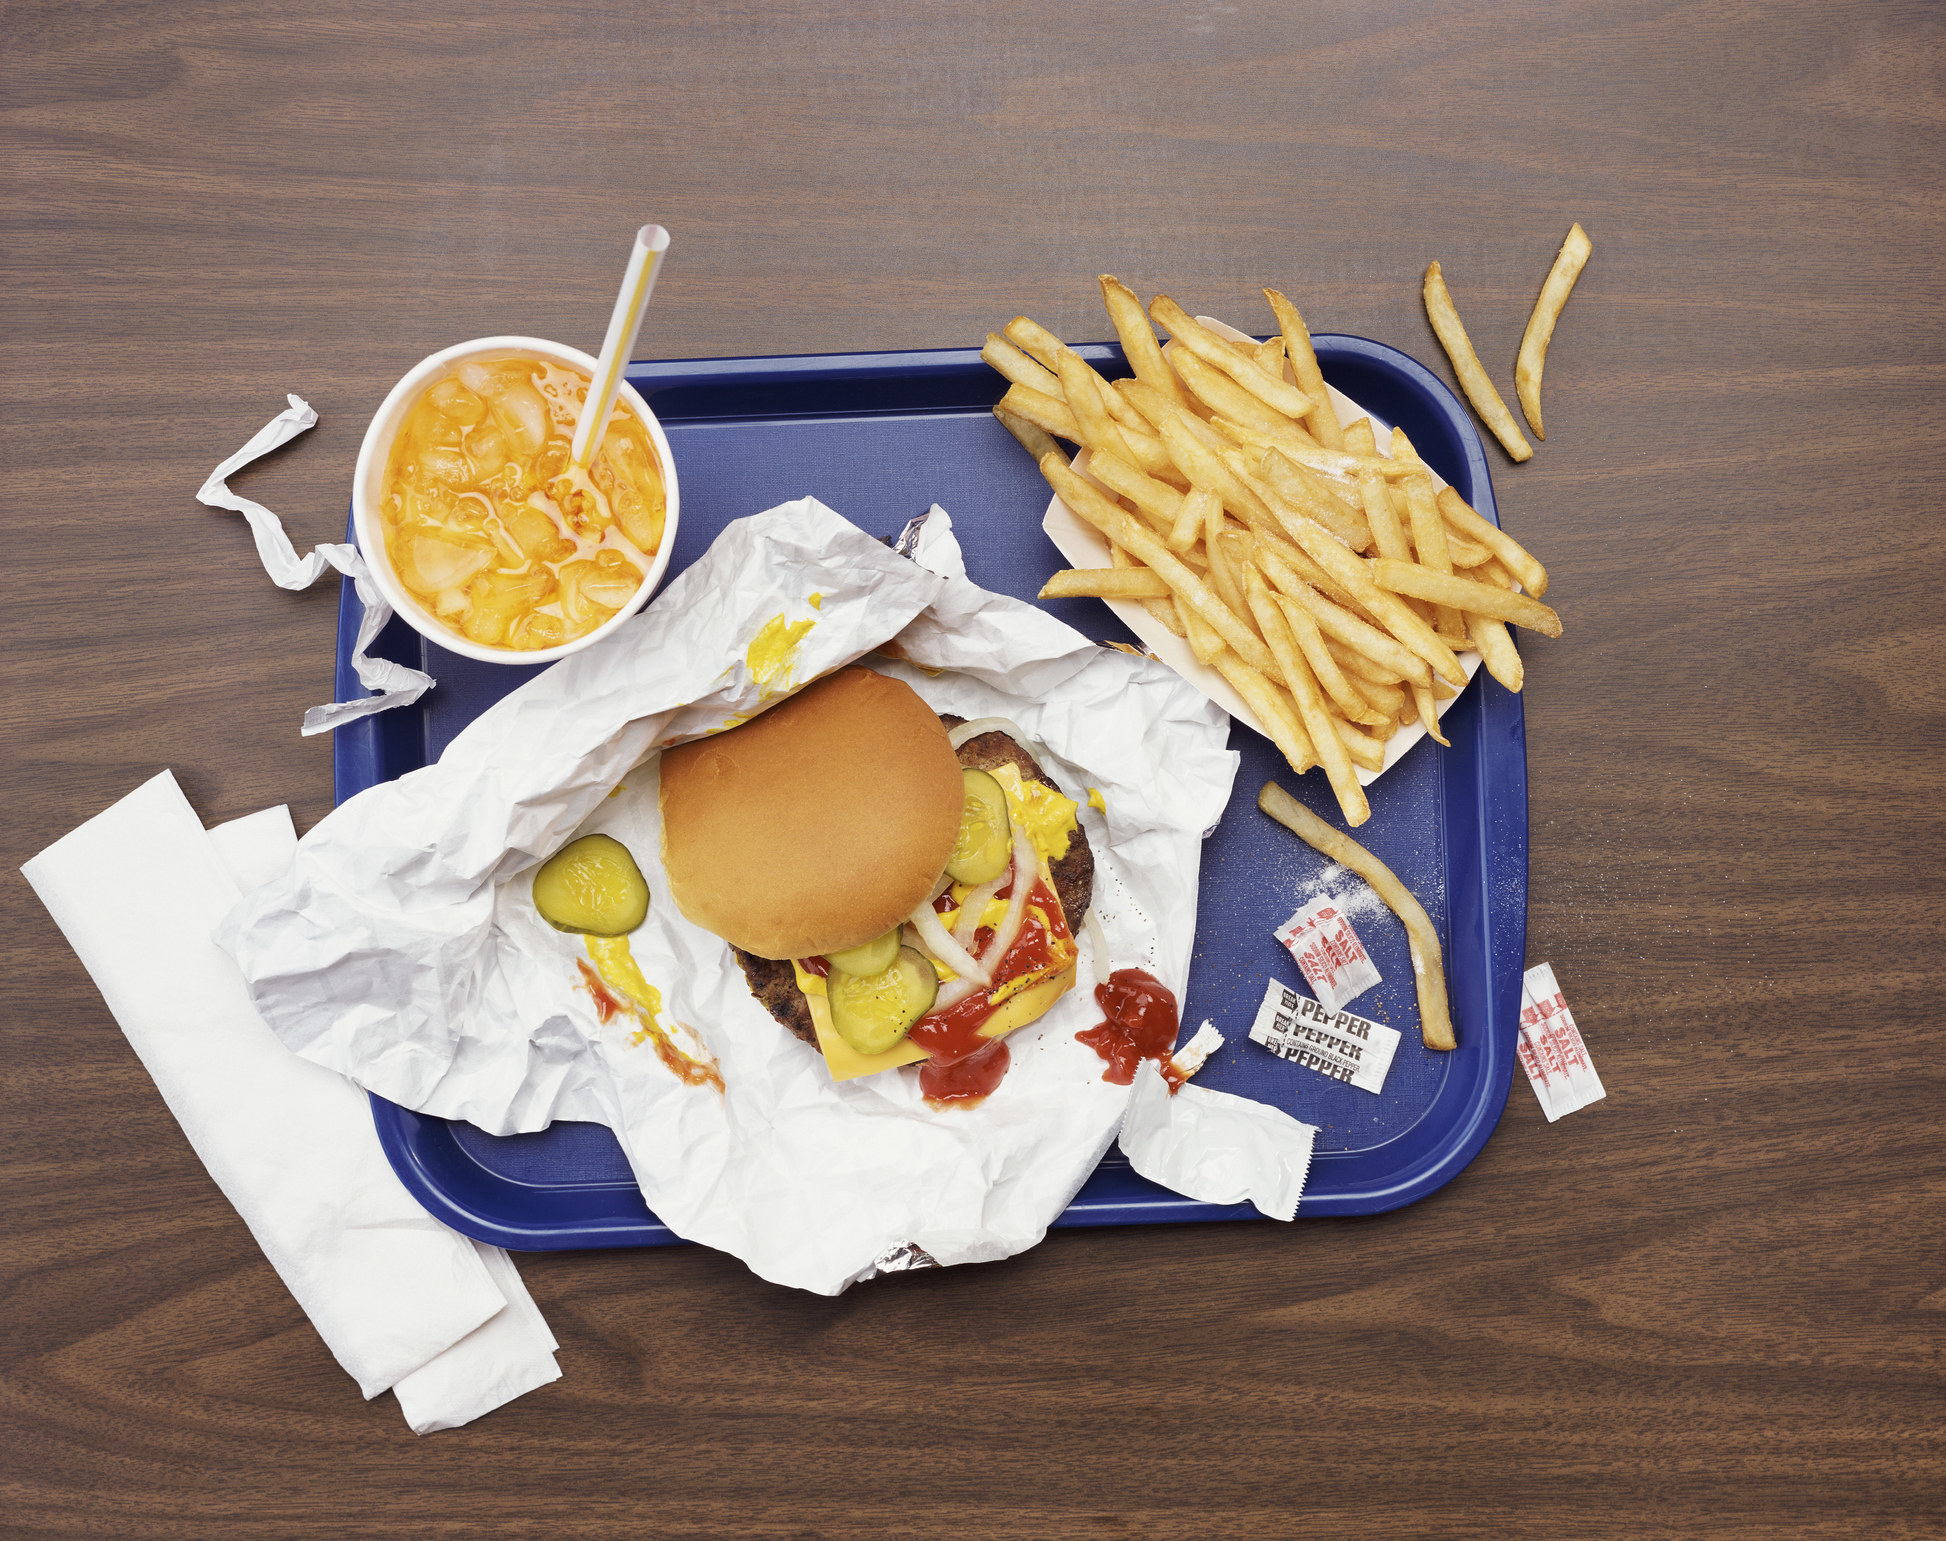 A cheeseburger, fries, and a soda on a tray